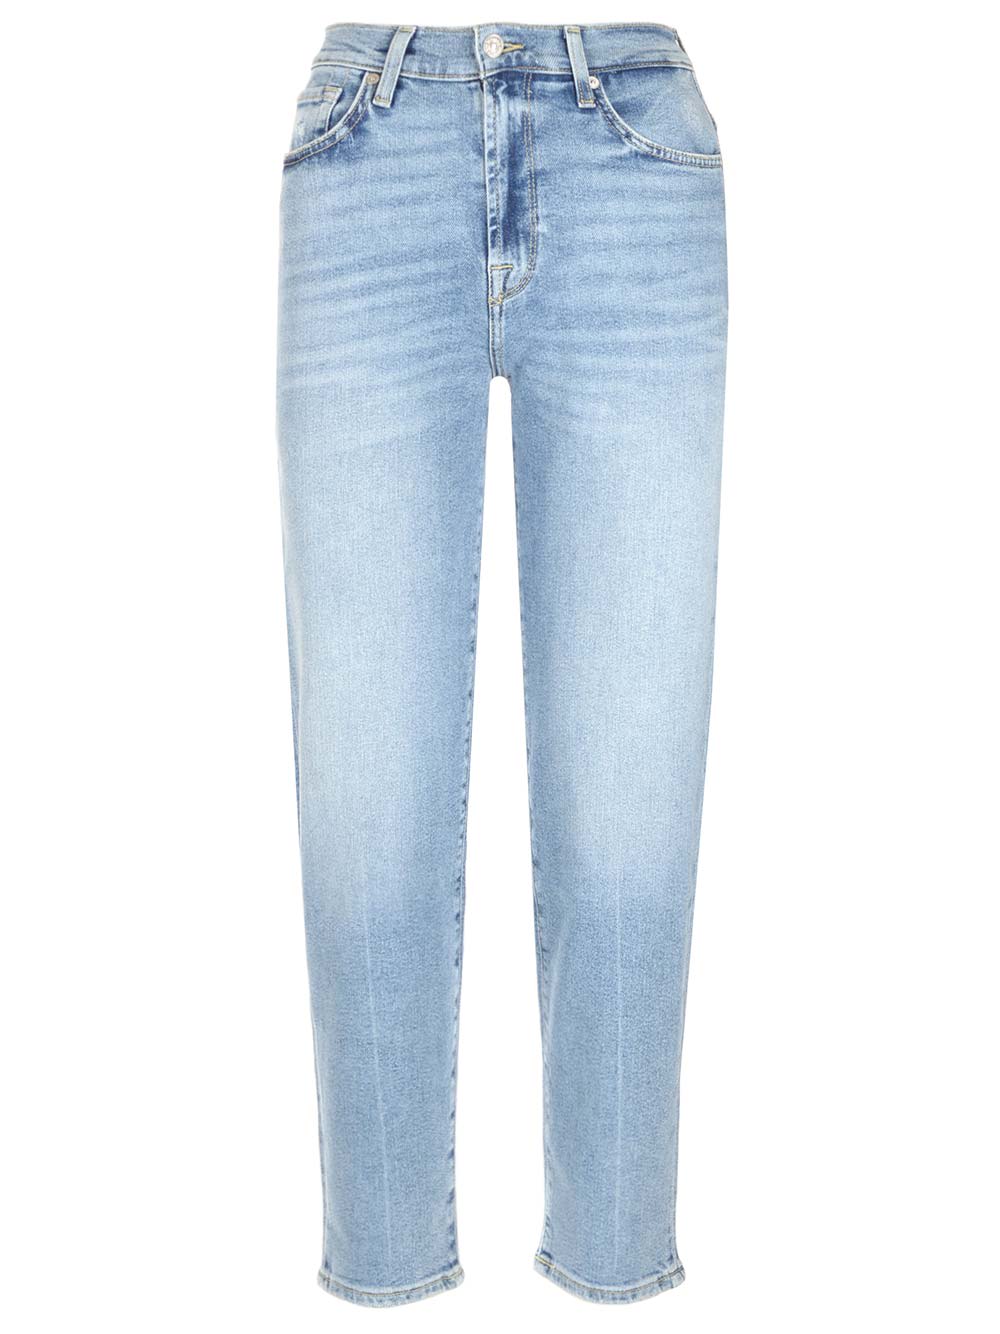 7 FOR ALL MANKIND MALIA JEANS